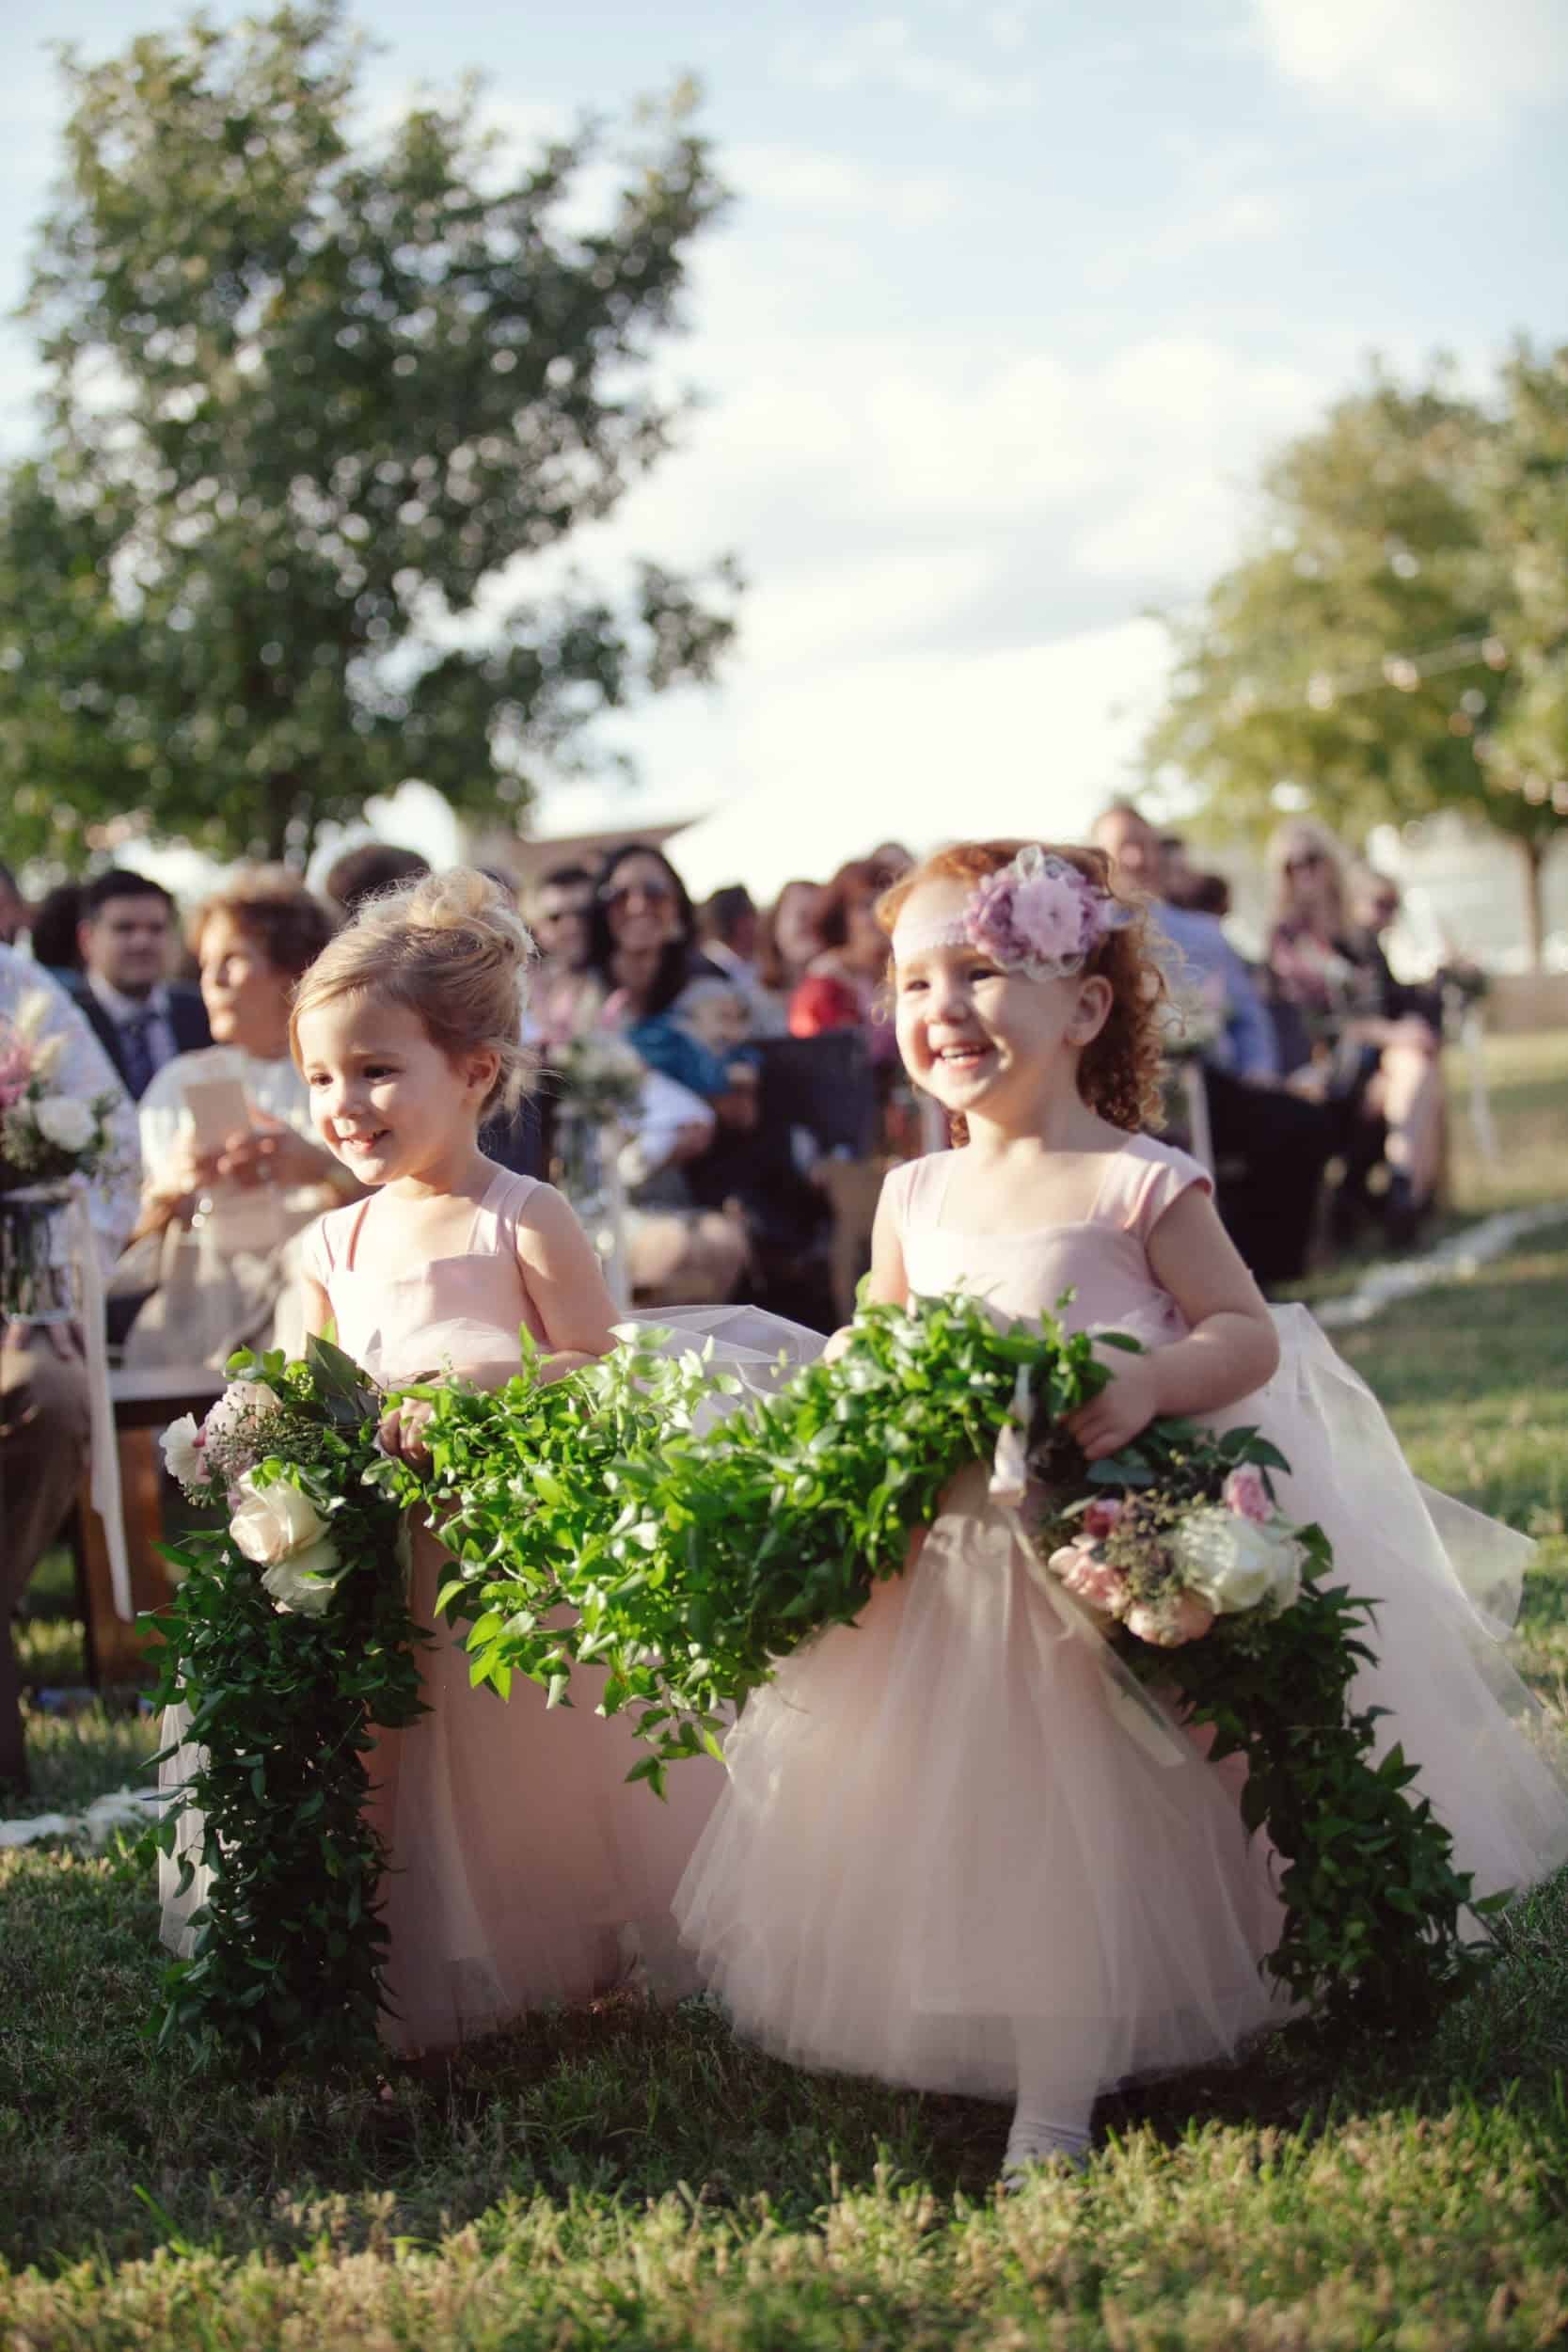 What Can Your Flower Girl Carry Down the Aisle Instead of Flowers? 277